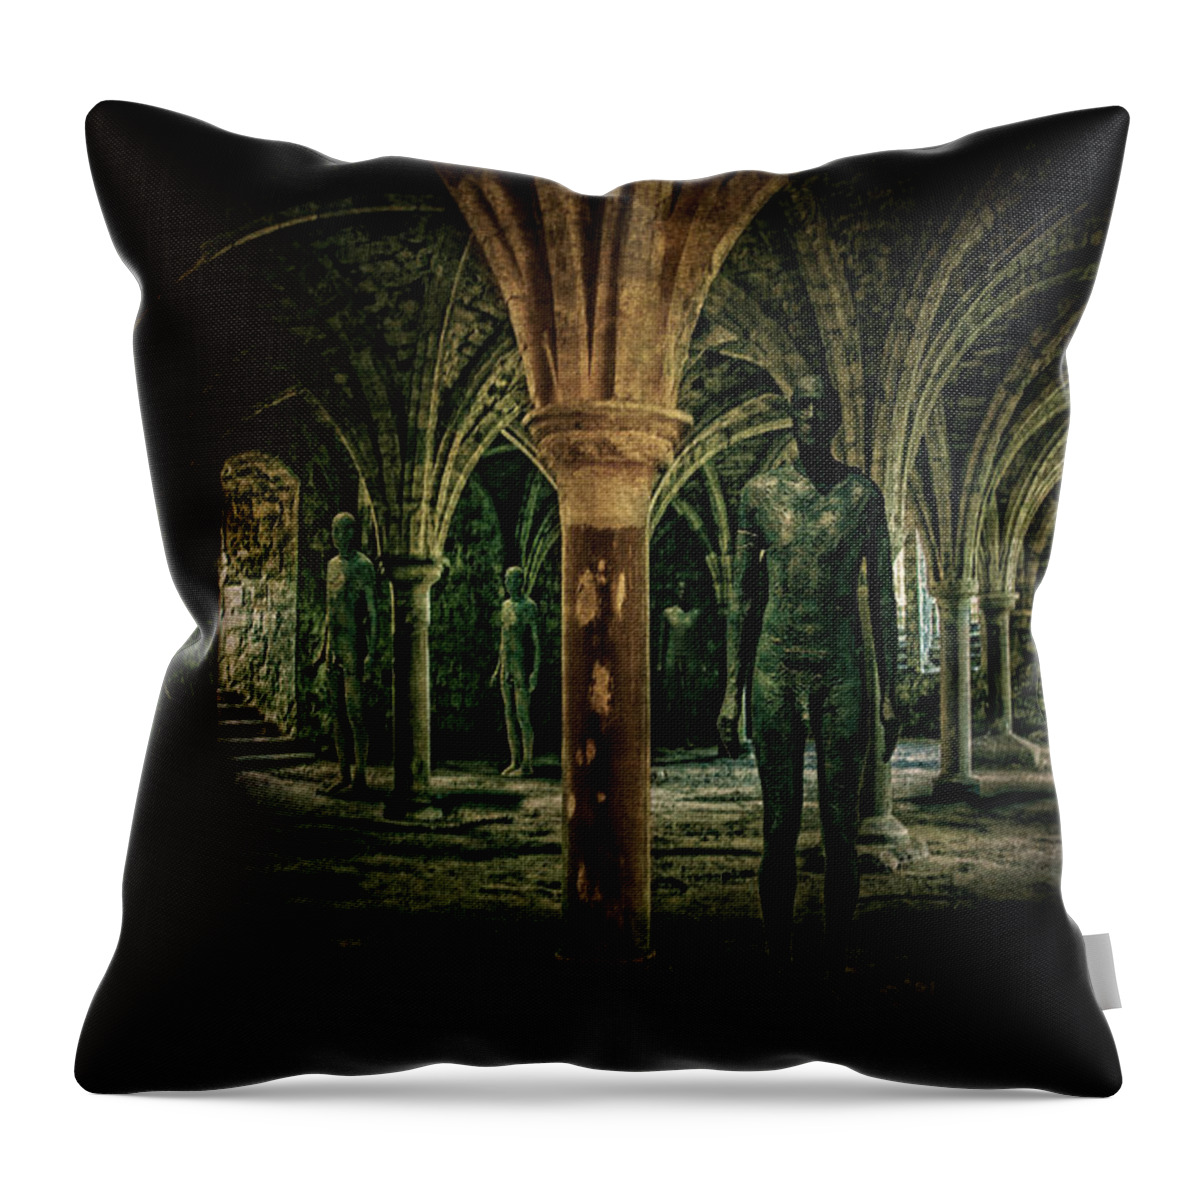 Crypt Throw Pillow featuring the photograph The Crypt by Chris Lord